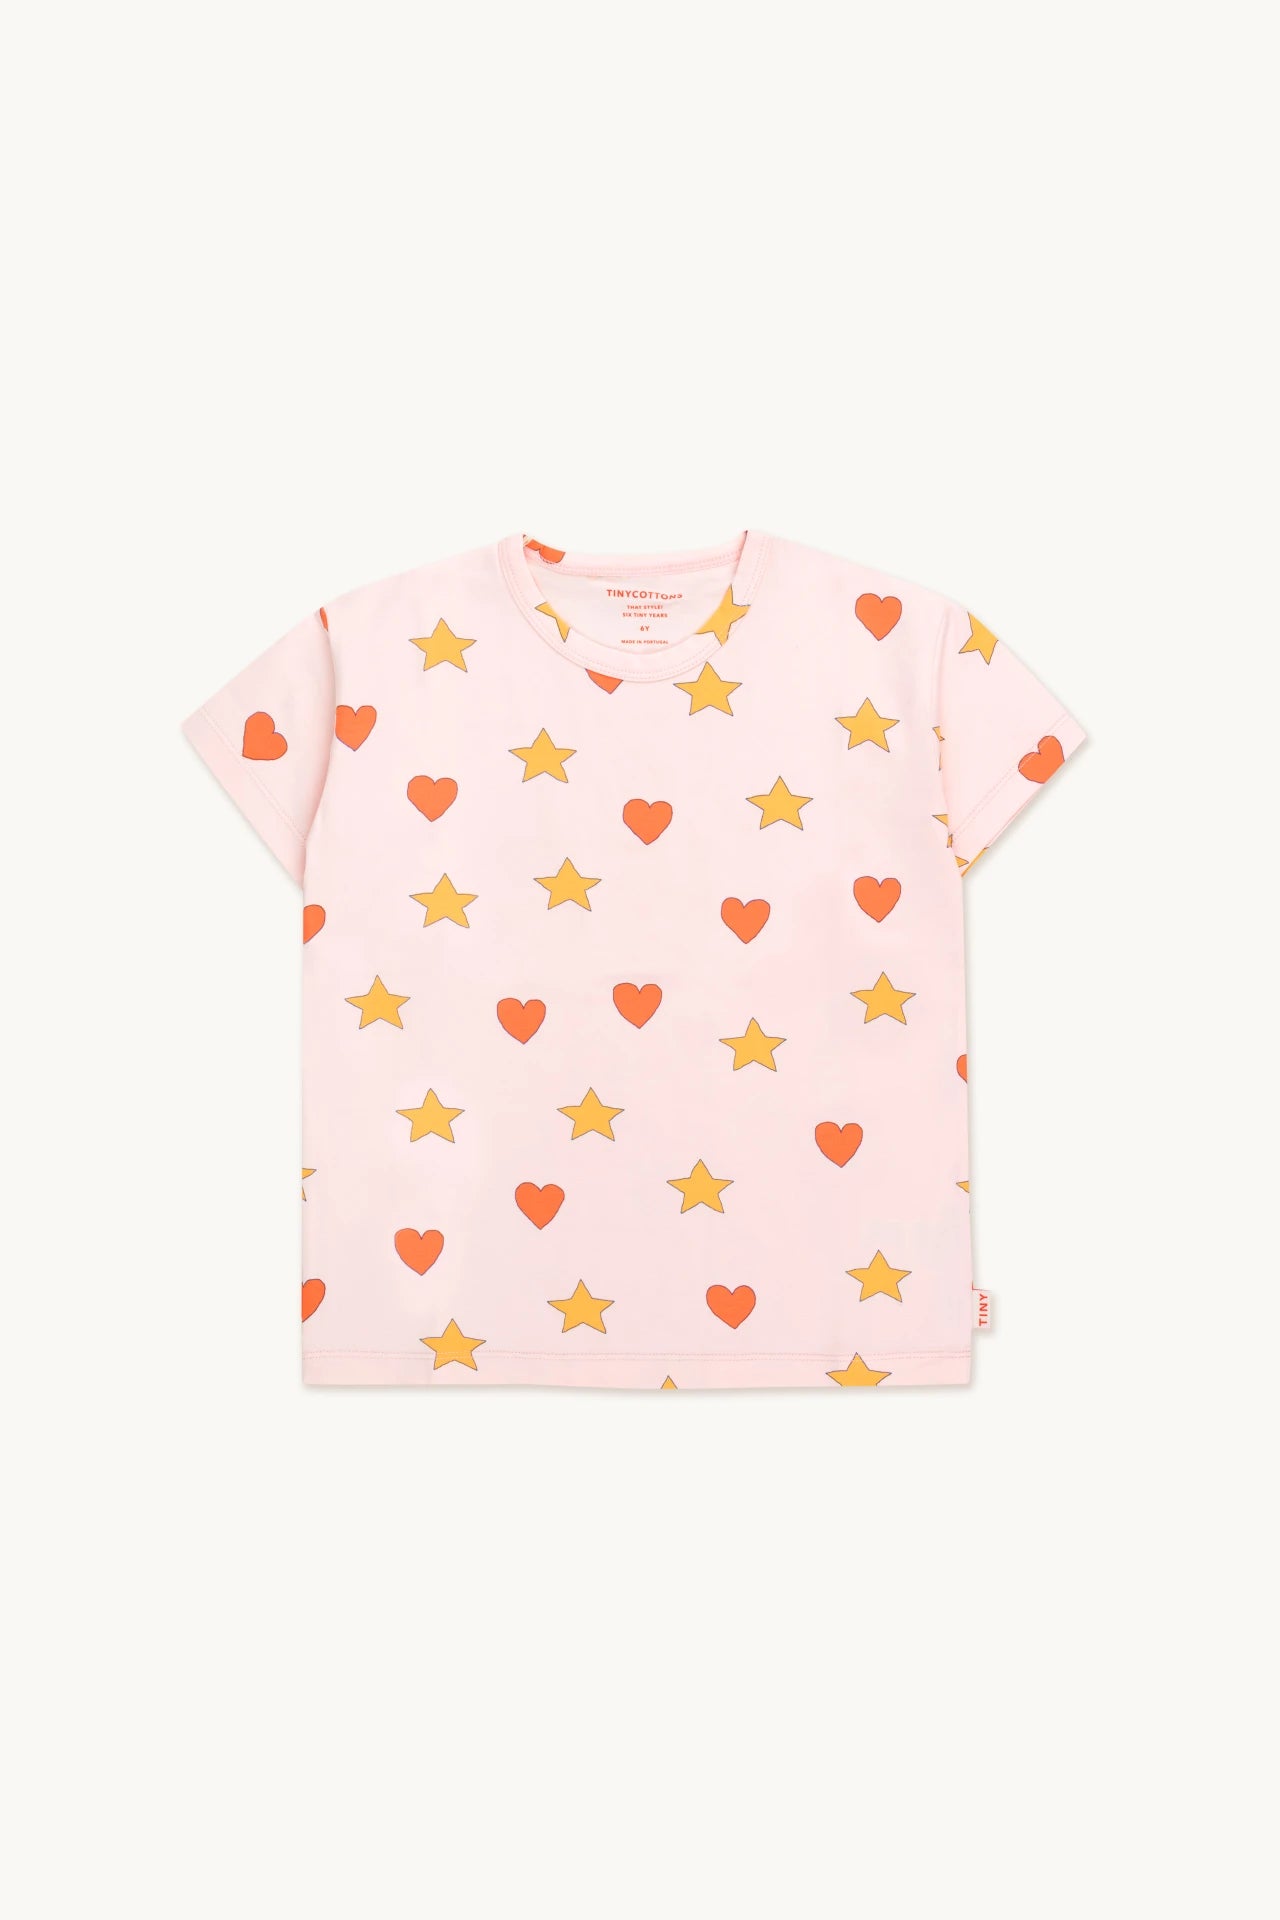 Tiny Cottons - Hearts and Stars T-Shirt